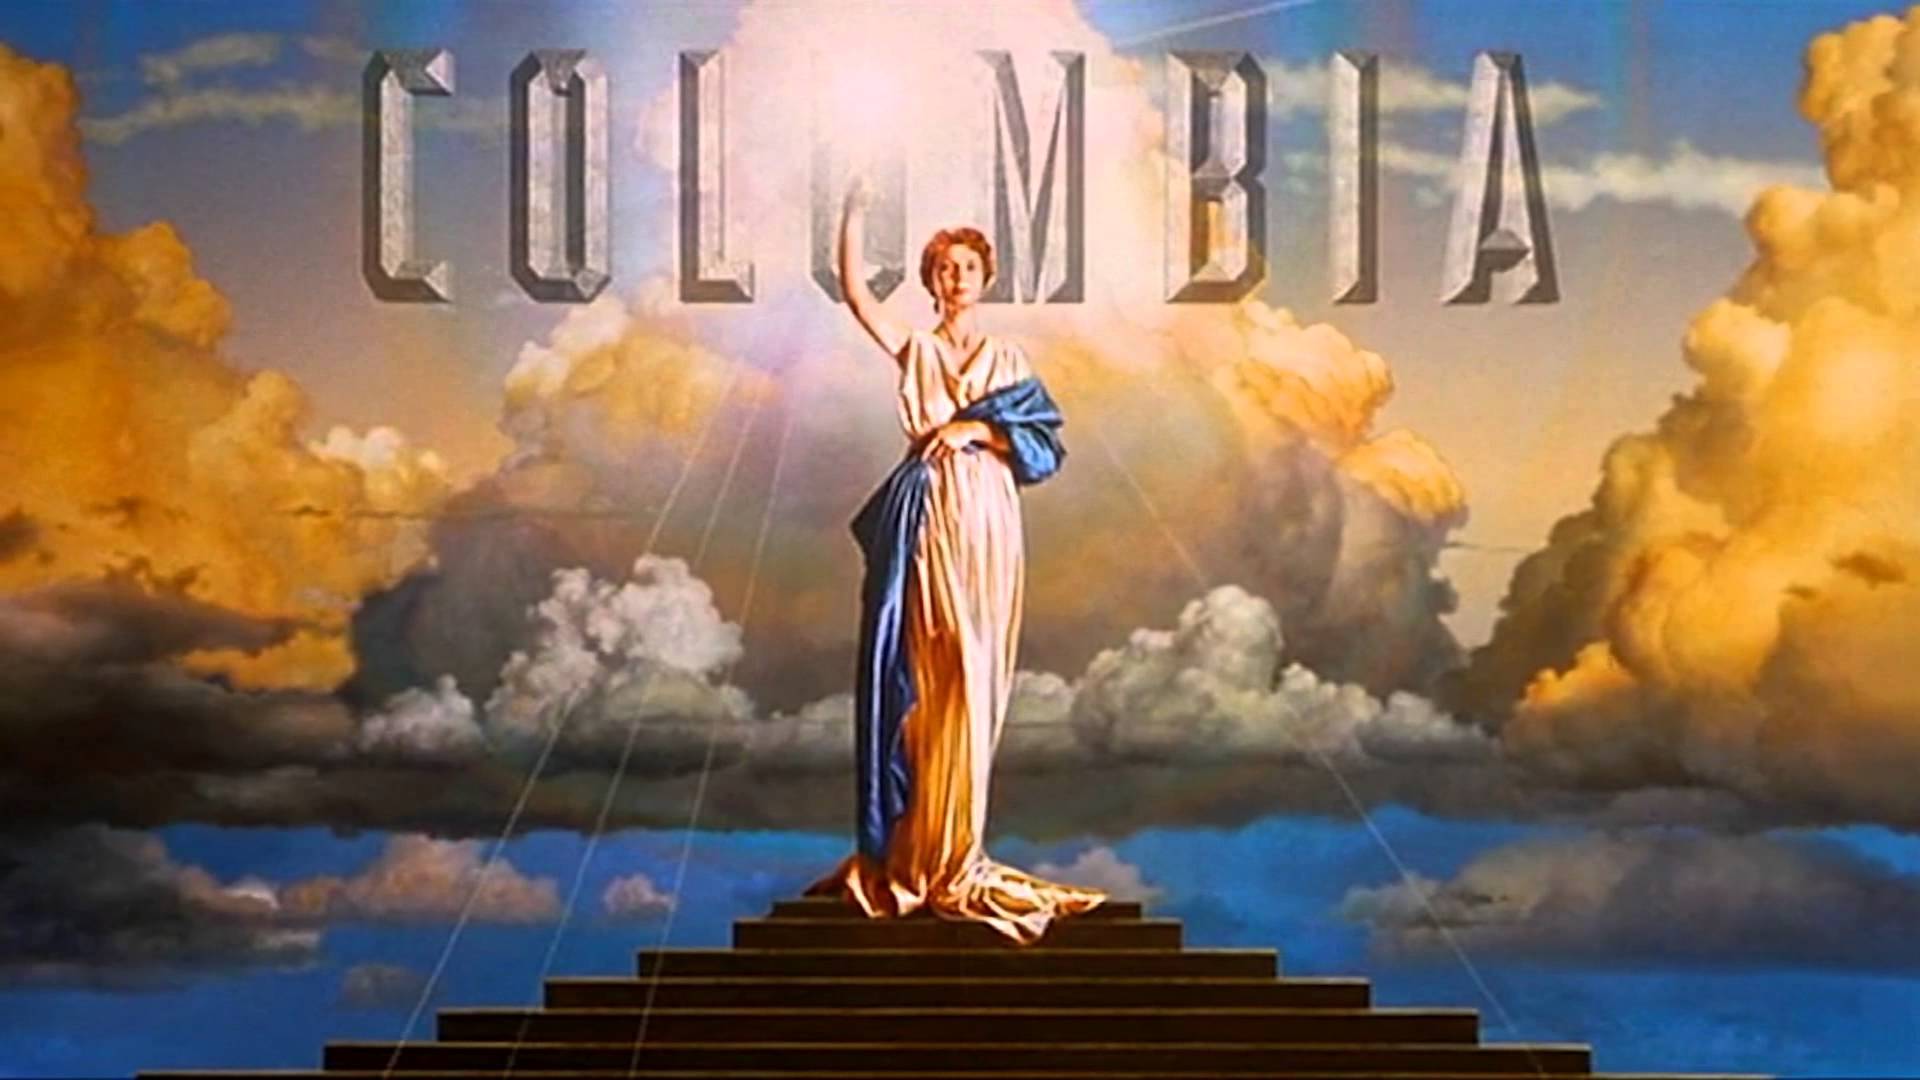 Columbia Pictures Wallpapers Wallpaper Cave